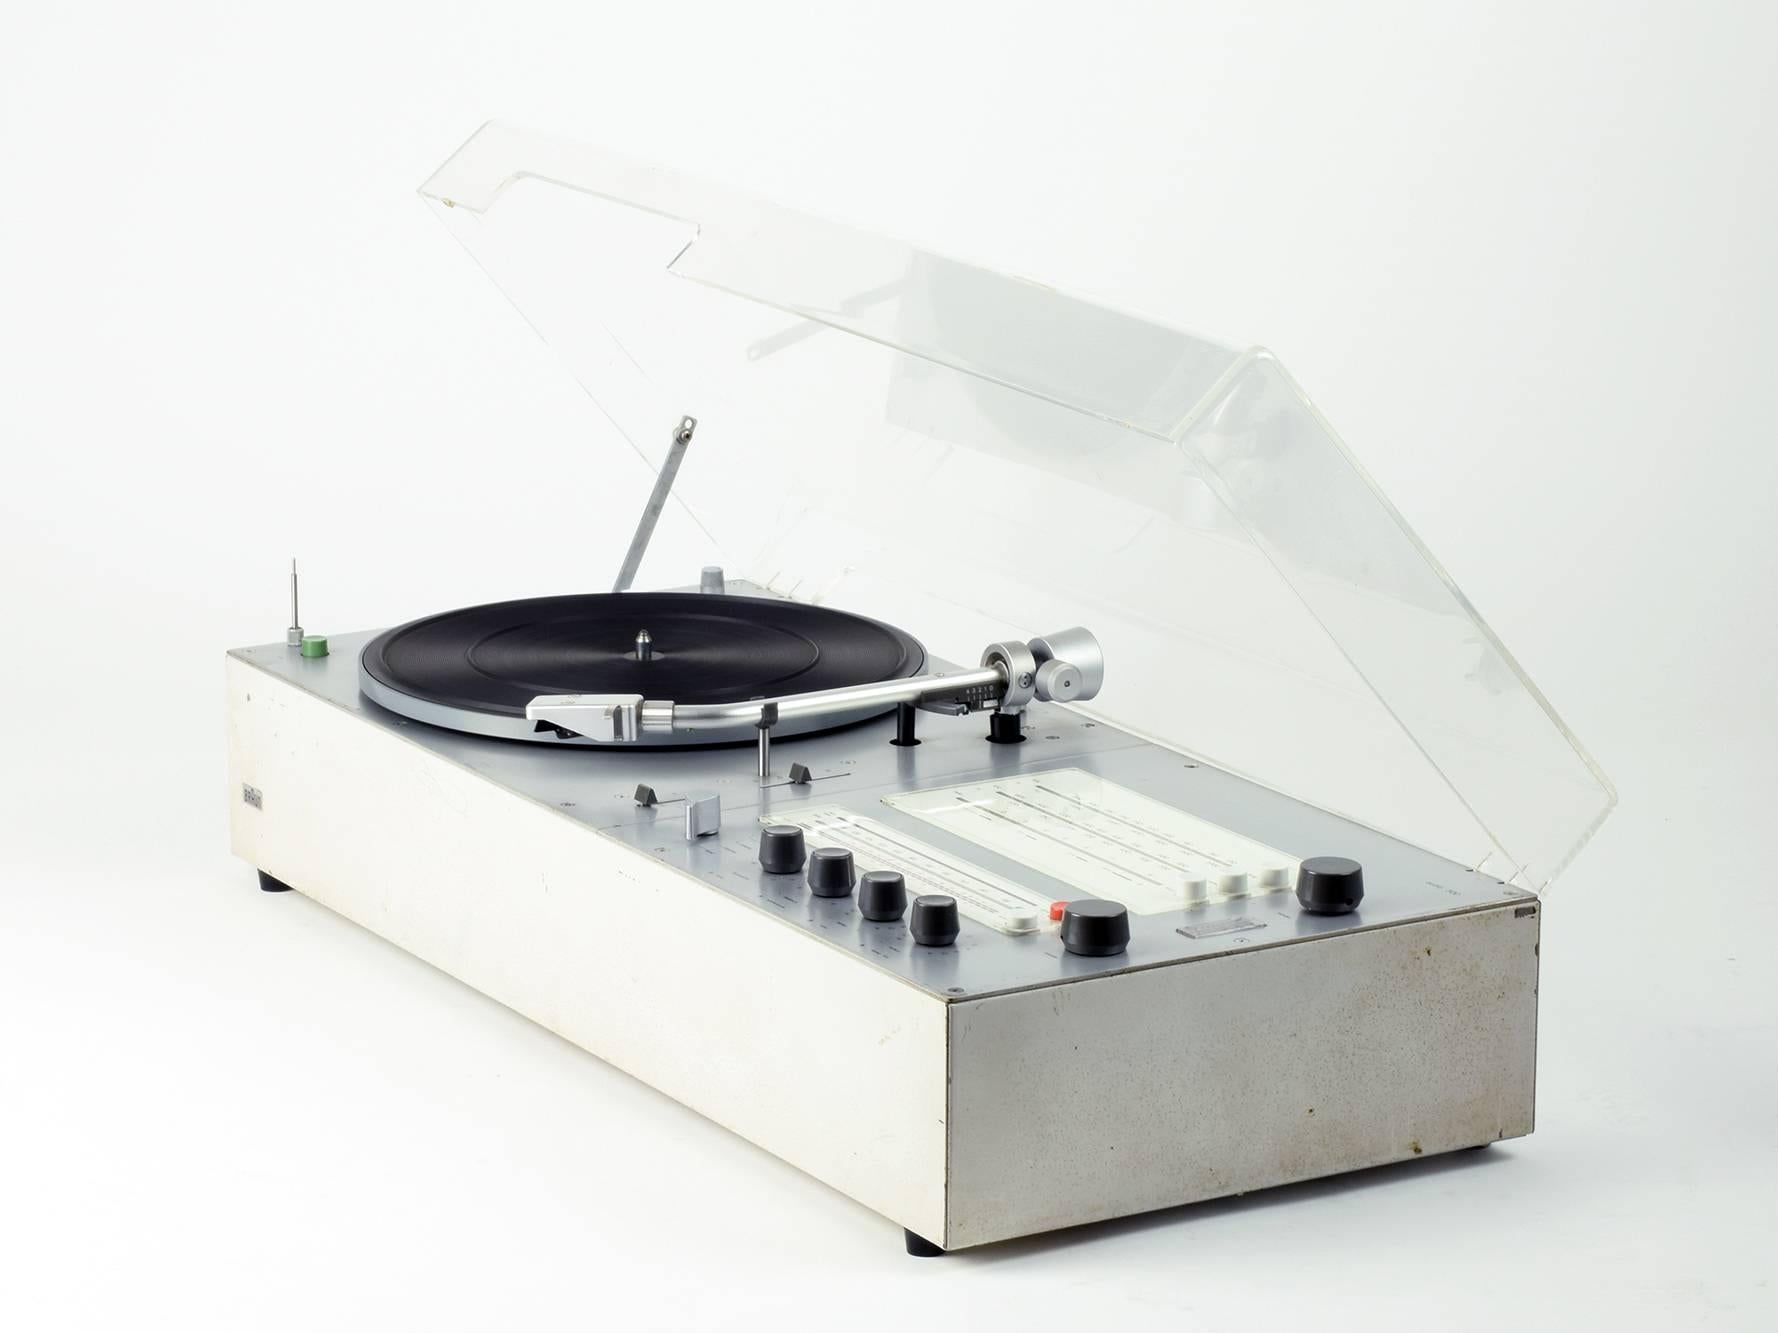 Dieter Rams
Braun AG, Germany (manufacturer)
Audio 300, hi-fi system (turntable/amplifier/tuner), 1969

White casing, aluminium coloured metal front/top panel with grey, graphite and coloured switches, acrylic lid.
Serial number 11970

A